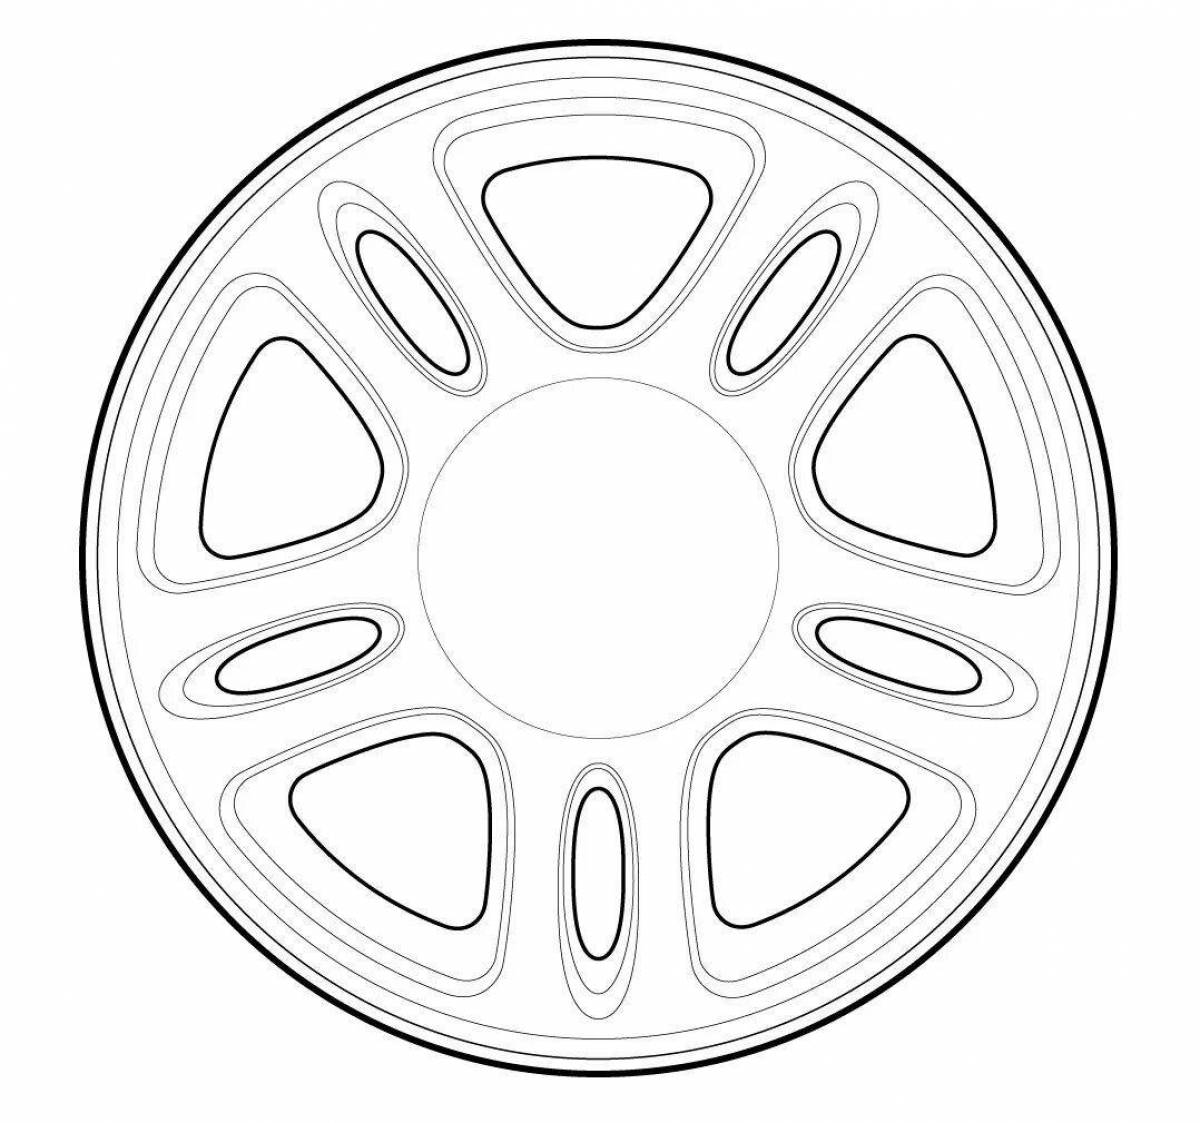 Playful wheel coloring page for kids